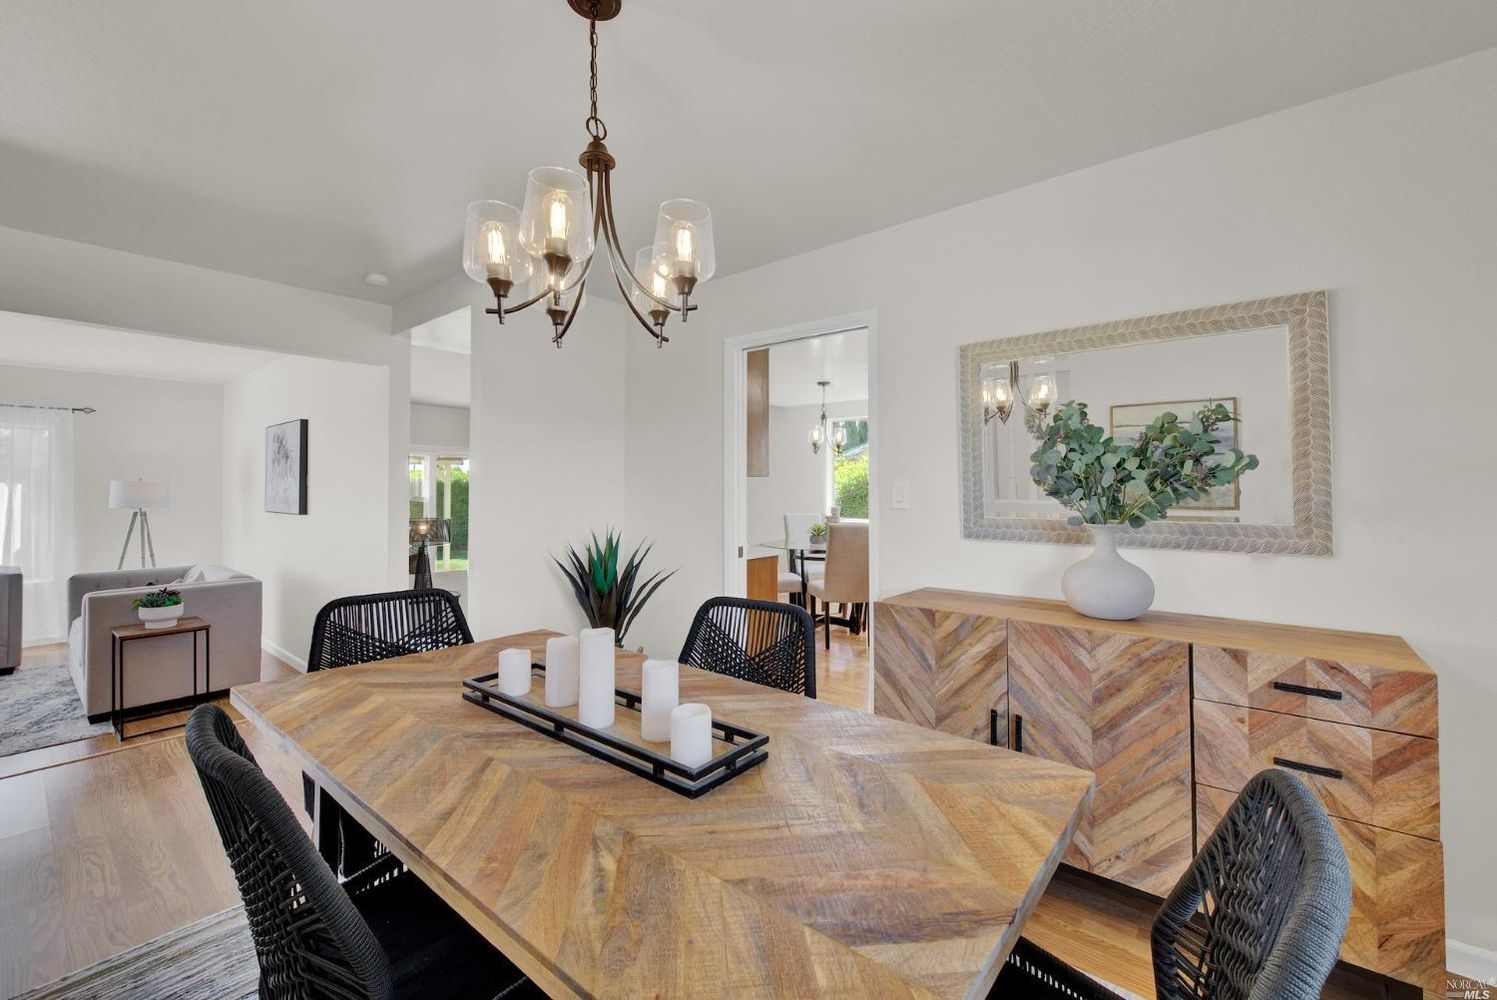 Dining room staging and design in Concord, California